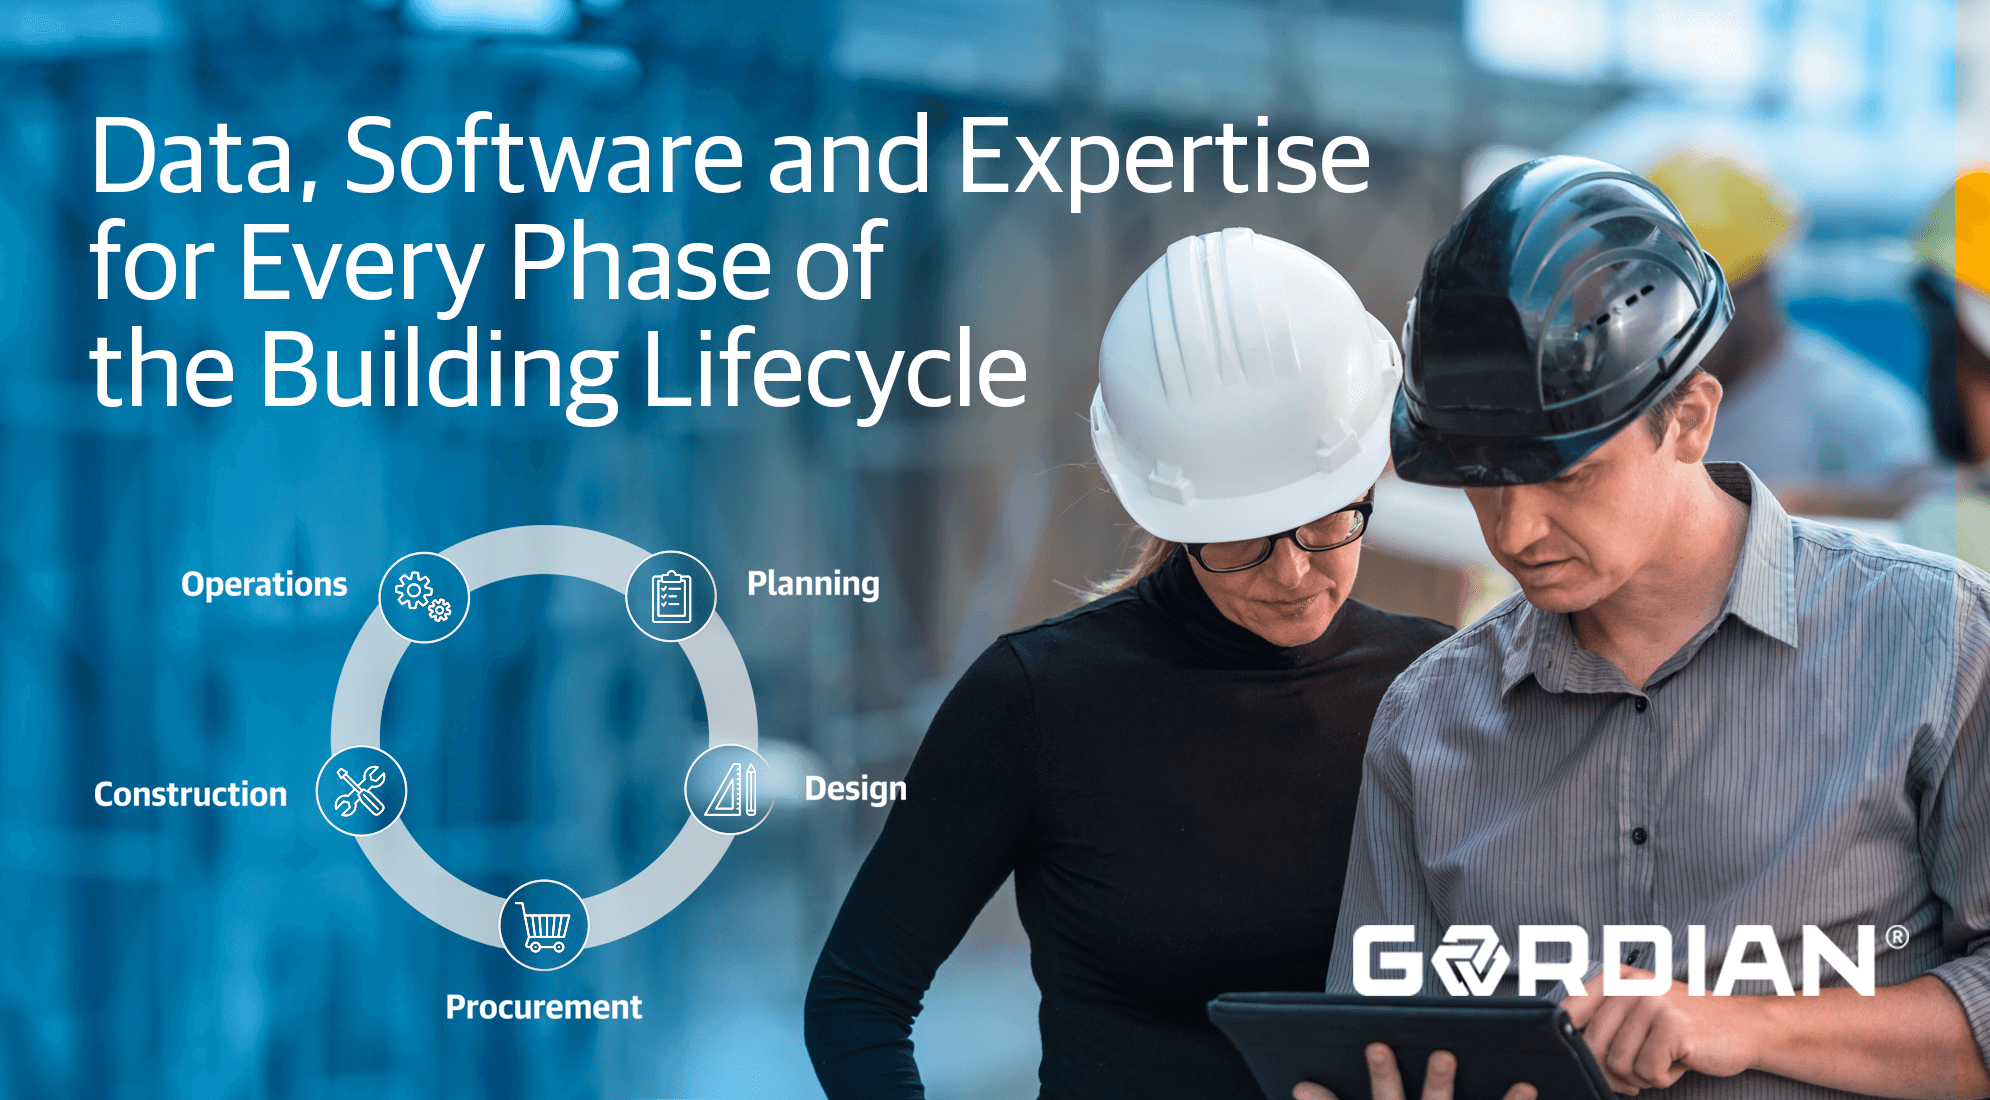 Solutions for Every Phase of the Building Lifecycle